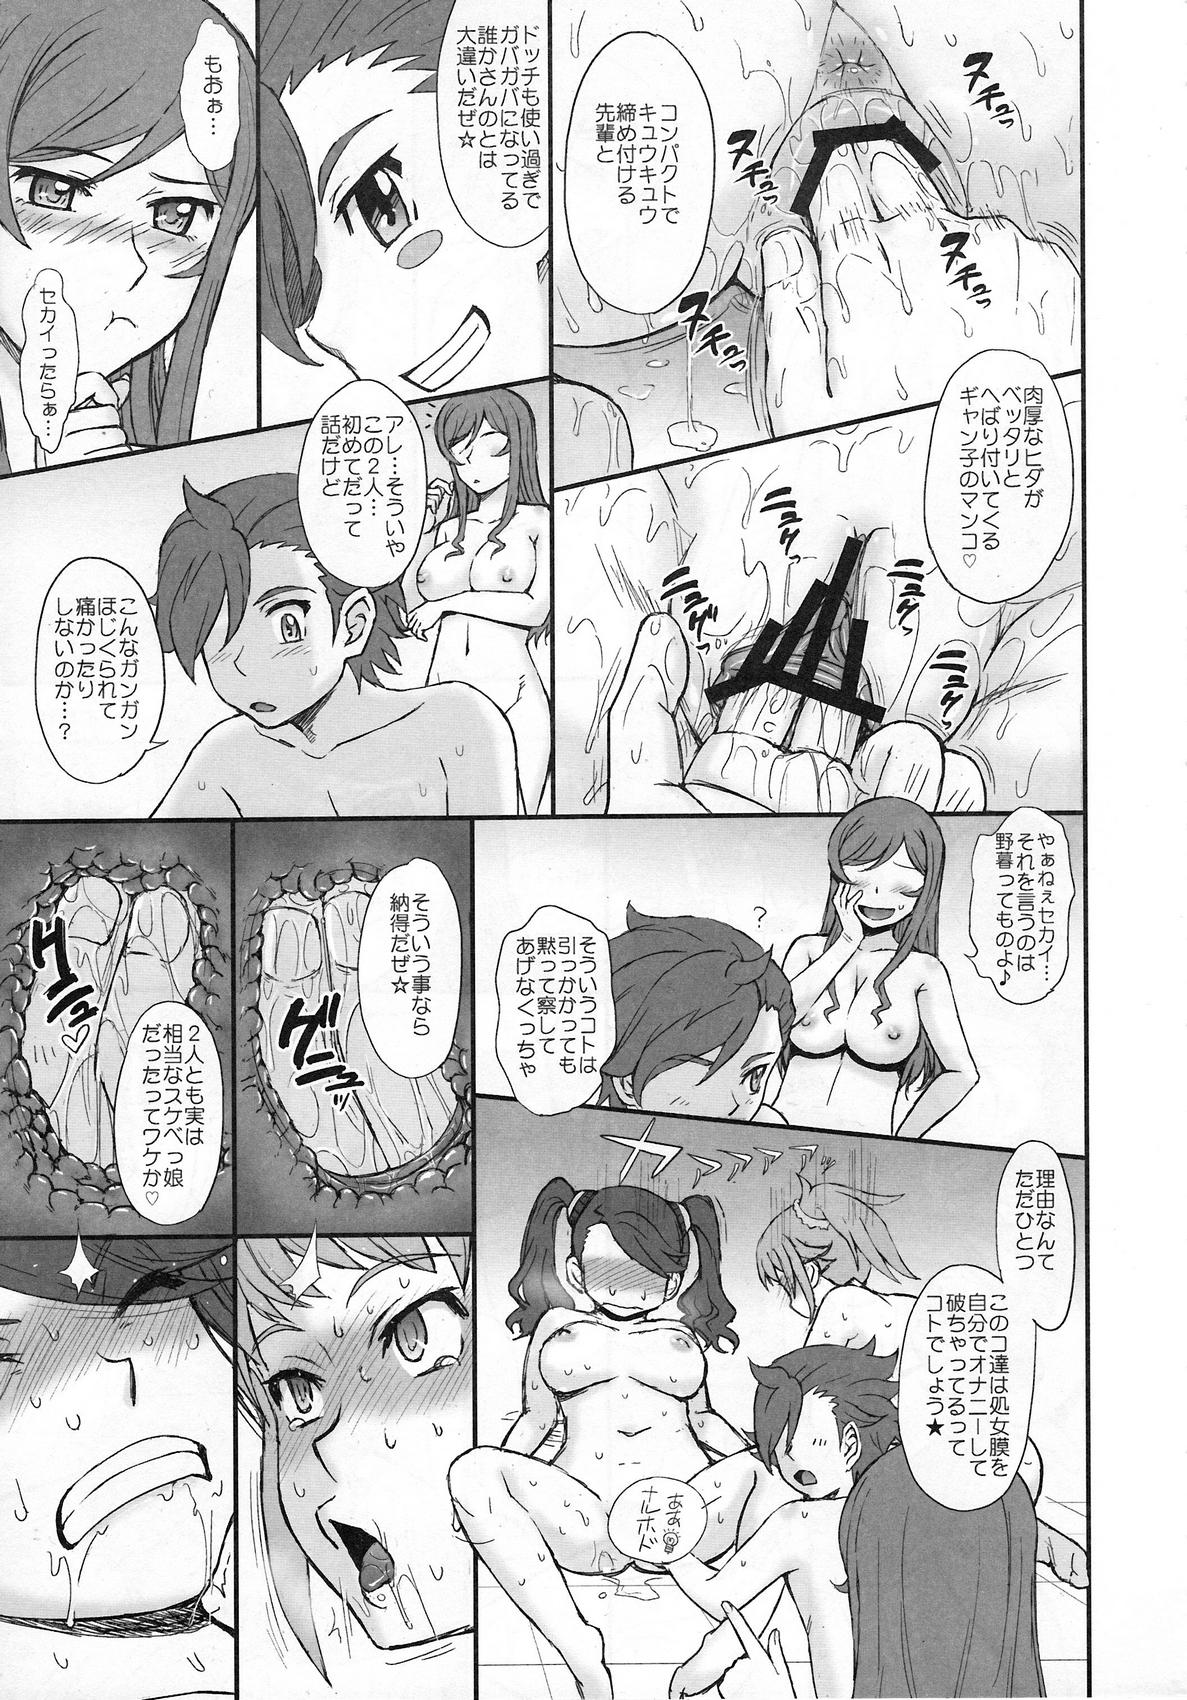 Oralsex Try Try Try!! - Gundam build fighters try Milfporn - Page 12